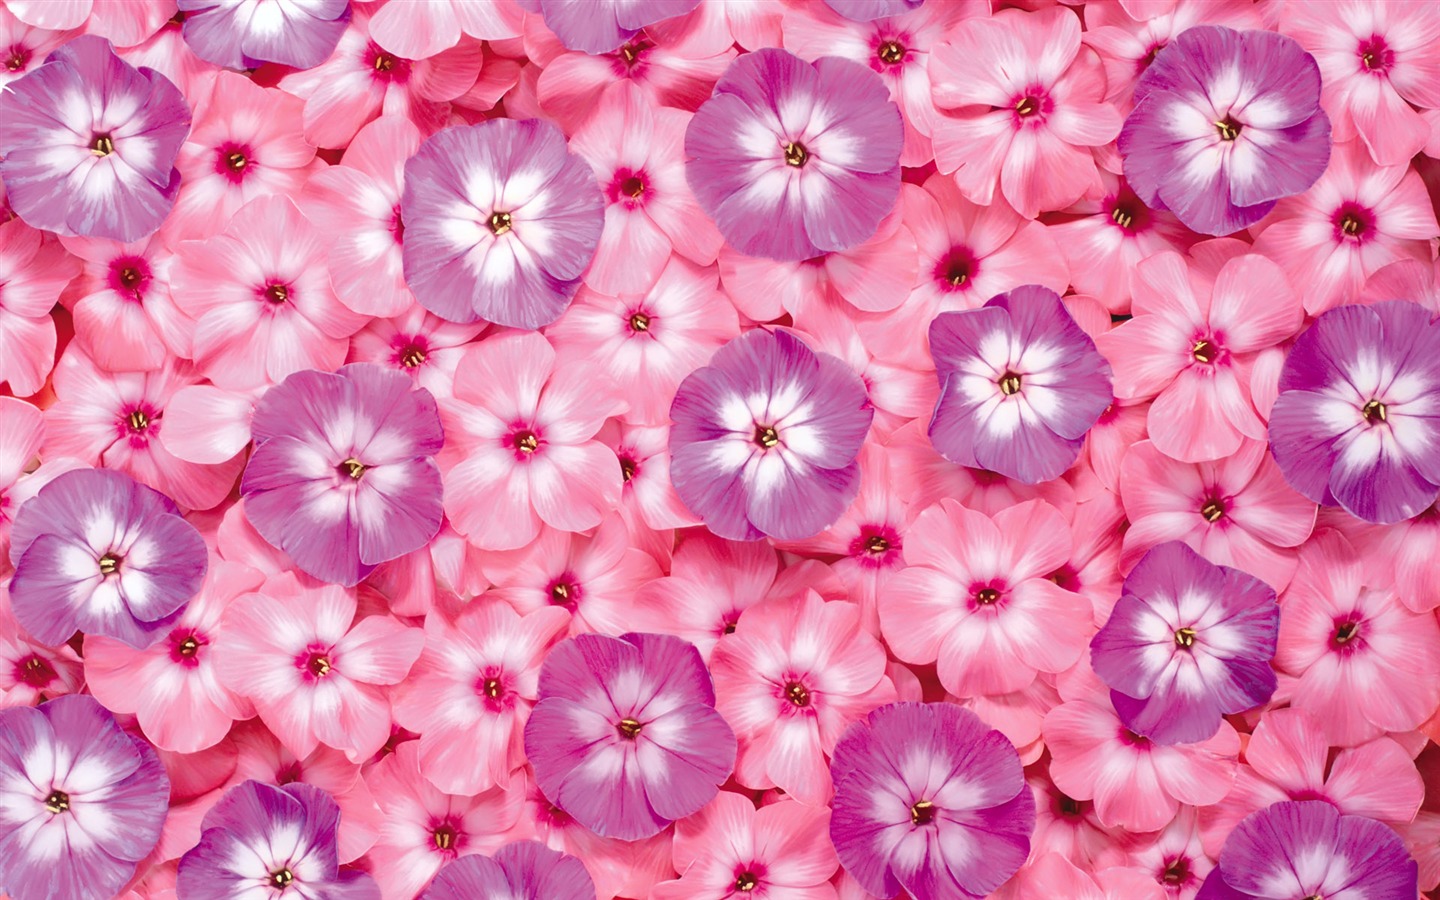 Surrounded by stunning flowers wallpaper #5 - 1440x900